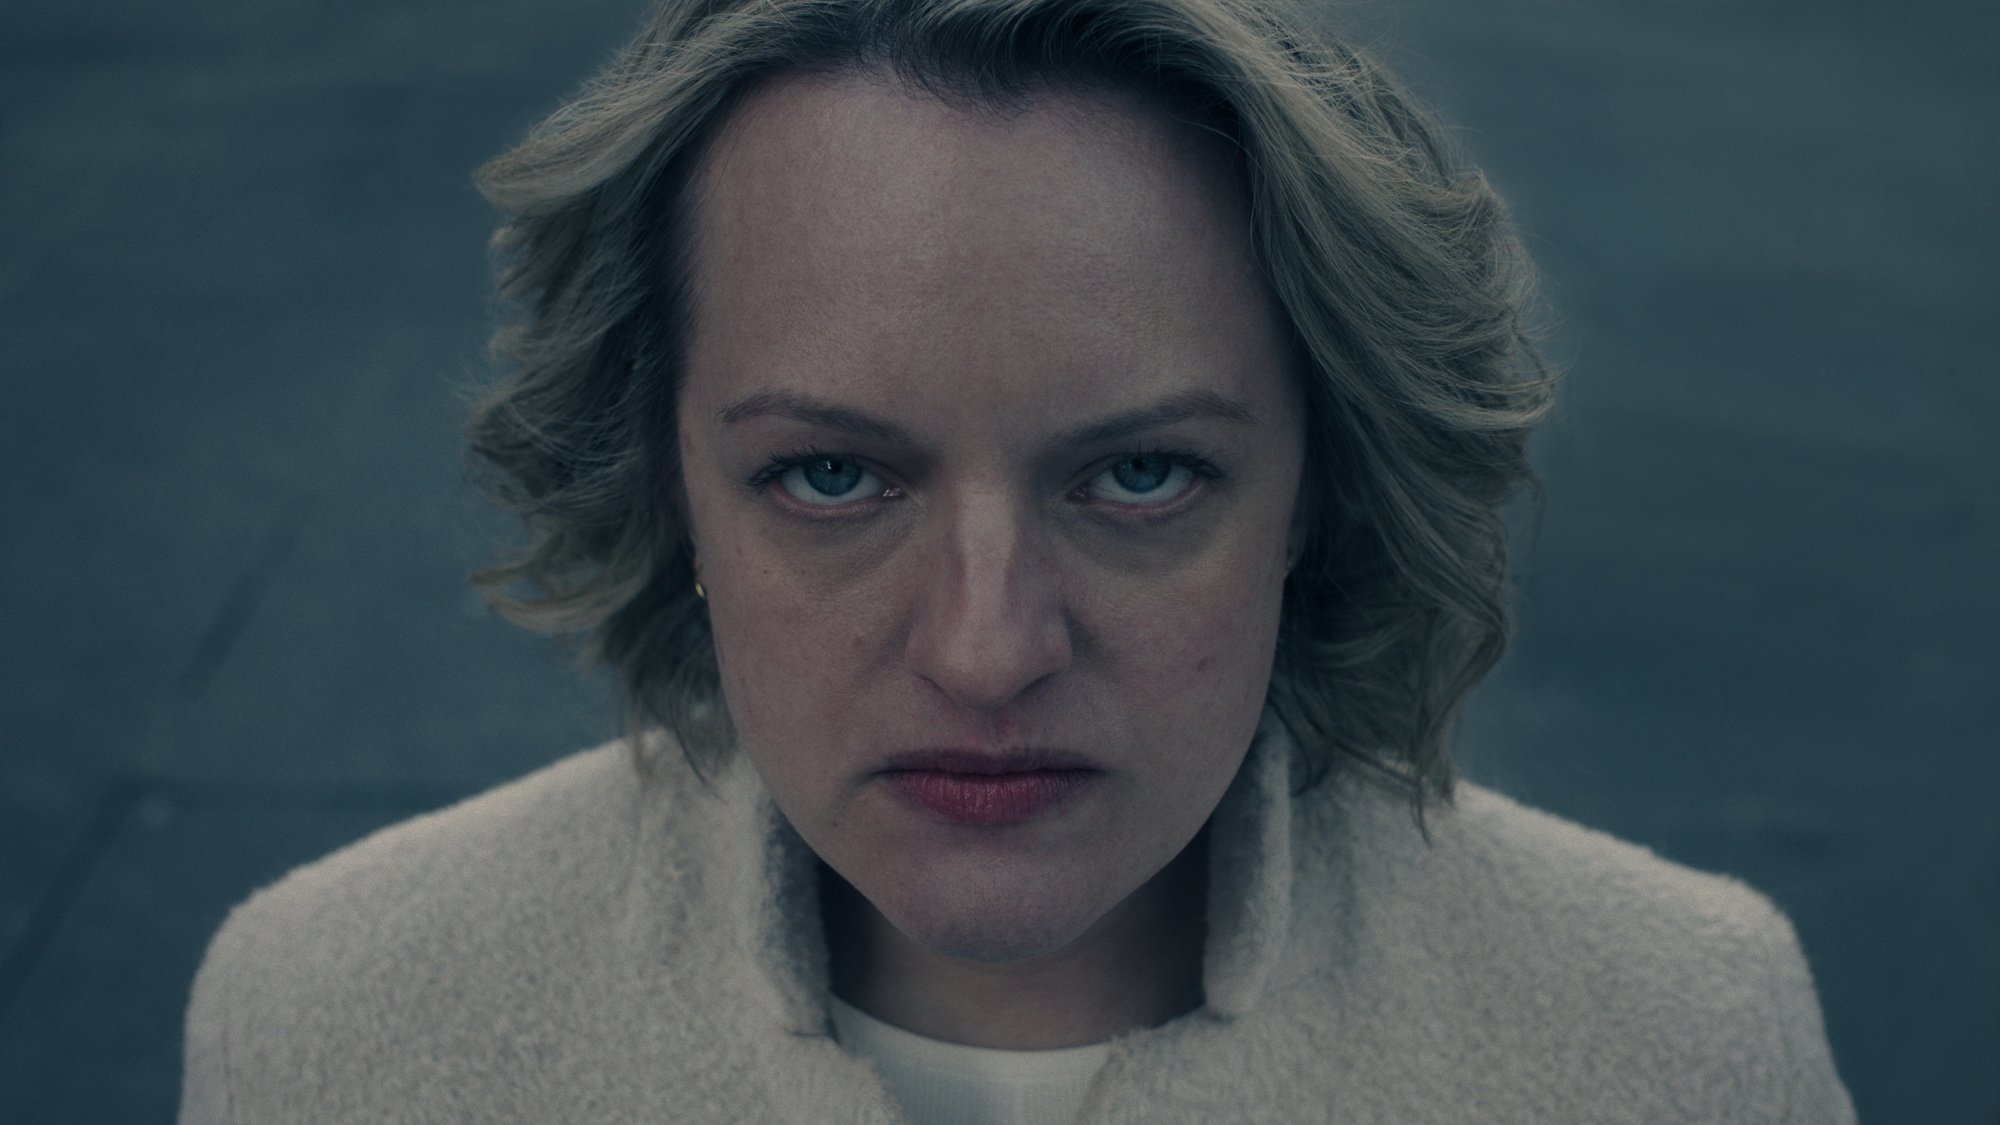 Elisabeth Moss as June in 'The Handmaid's Tale' Season 5 for our article about the episode 1 premiere release date and time. She's staring into the camera and looks angry.